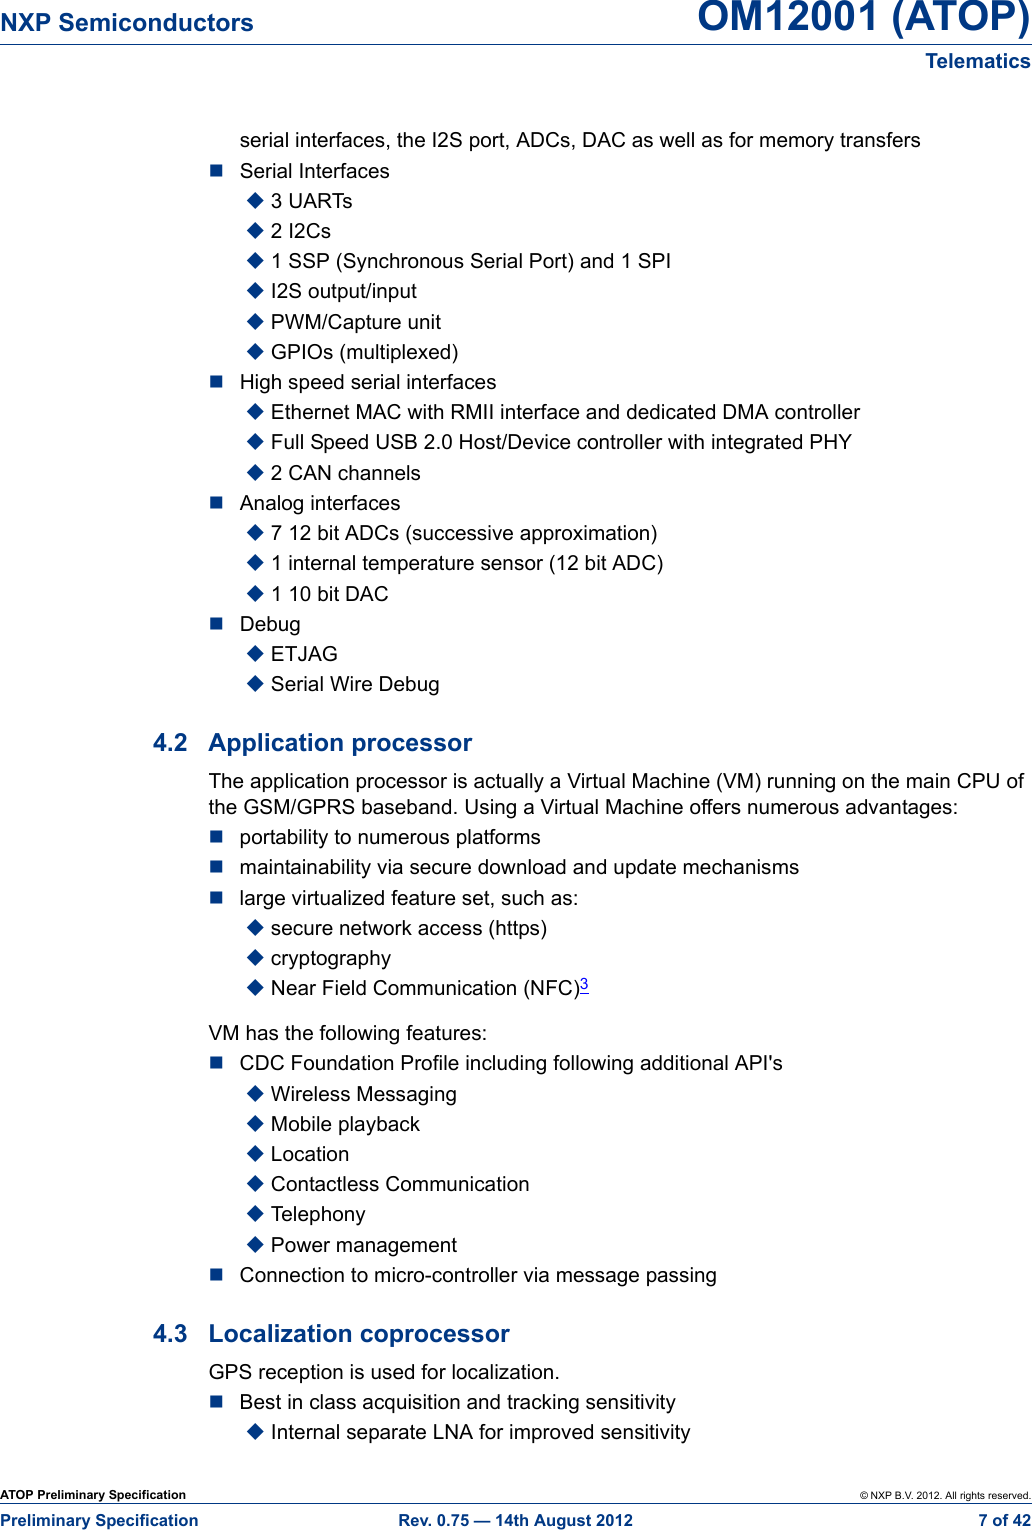 ATOP Preliminary Specification © NXP B.V. 2012. All rights reserved.Preliminary Specification Rev. 0.75 — 14th August 2012  7 of 42NXP Semiconductors OM12001 (ATOP)Telematicsserial interfaces, the I2S port, ADCs, DAC as well as for memory transfersSerial Interfaces3 UARTs2 I2Cs1 SSP (Synchronous Serial Port) and 1 SPII2S output/inputPWM/Capture unitGPIOs (multiplexed)High speed serial interfacesEthernet MAC with RMII interface and dedicated DMA controllerFull Speed USB 2.0 Host/Device controller with integrated PHY2 CAN channelsAnalog interfaces7 12 bit ADCs (successive approximation)1 internal temperature sensor (12 bit ADC)1 10 bit DACDebugETJAGSerial Wire Debug4.2 Application processorThe application processor is actually a Virtual Machine (VM) running on the main CPU of the GSM/GPRS baseband. Using a Virtual Machine offers numerous advantages:portability to numerous platformsmaintainability via secure download and update mechanismslarge virtualized feature set, such as:secure network access (https)cryptographyNear Field Communication (NFC)3VM has the following features:CDC Foundation Profile including following additional API&apos;sWireless MessagingMobile playbackLocationContactless Communication TelephonyPower managementConnection to micro-controller via message passing4.3 Localization coprocessorGPS reception is used for localization.Best in class acquisition and tracking sensitivityInternal separate LNA for improved sensitivity